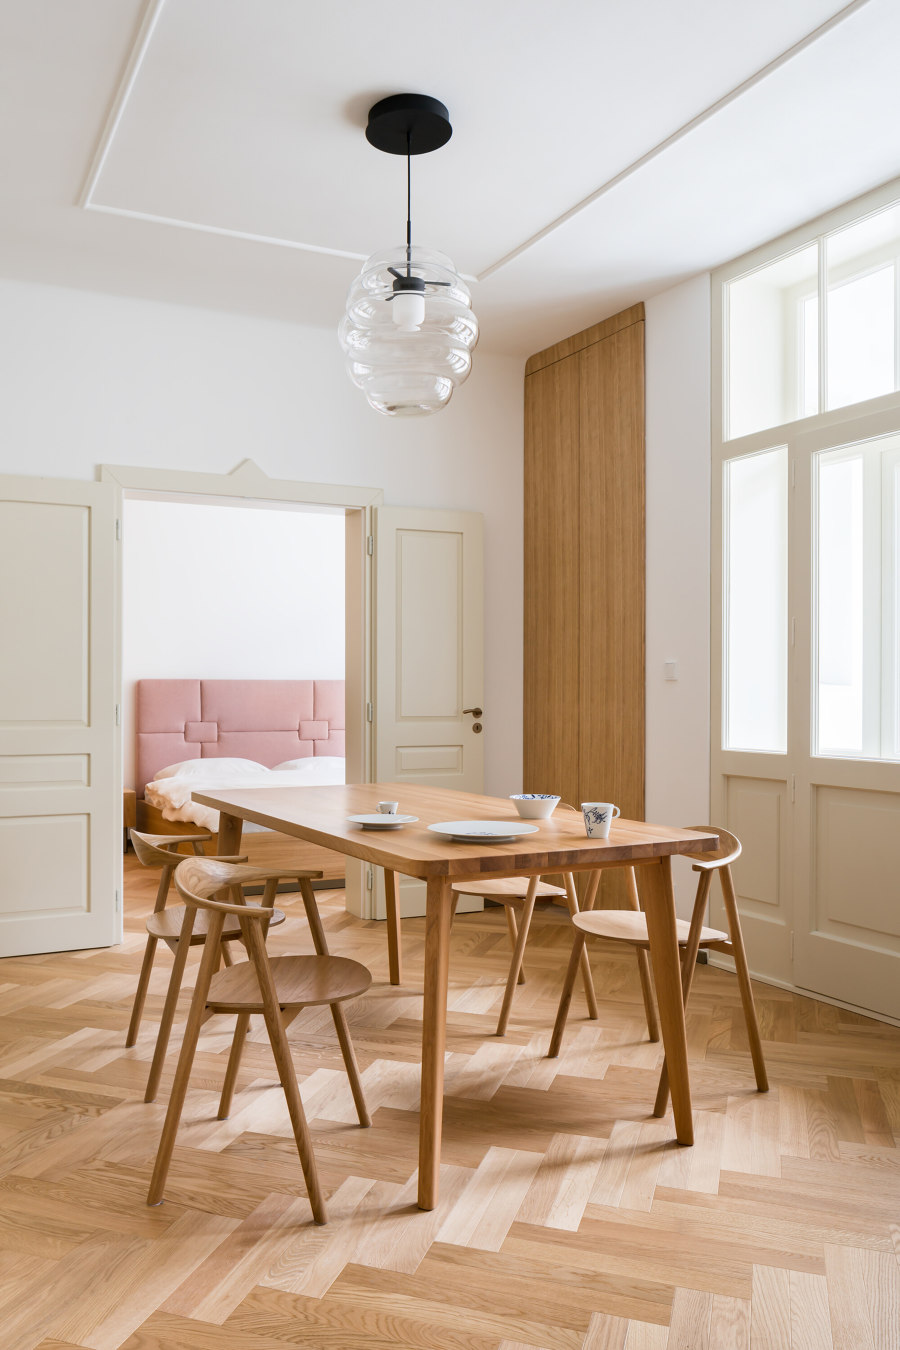 With Gracefulness from Dejvice de No Architects | Espacios habitables